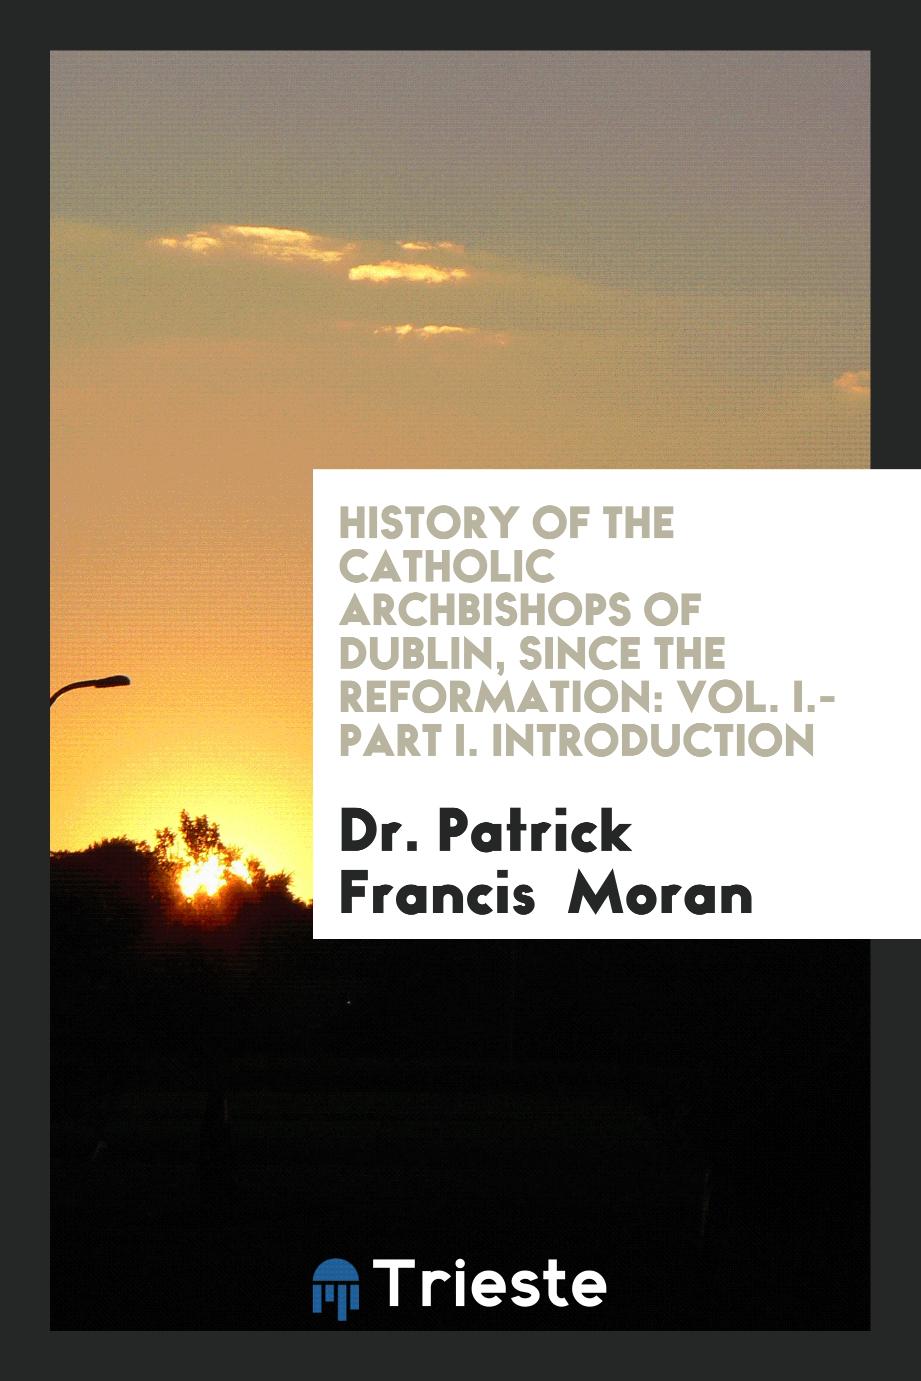 History of the Catholic Archbishops of Dublin, Since the Reformation: Vol. I.-Part I. Introduction